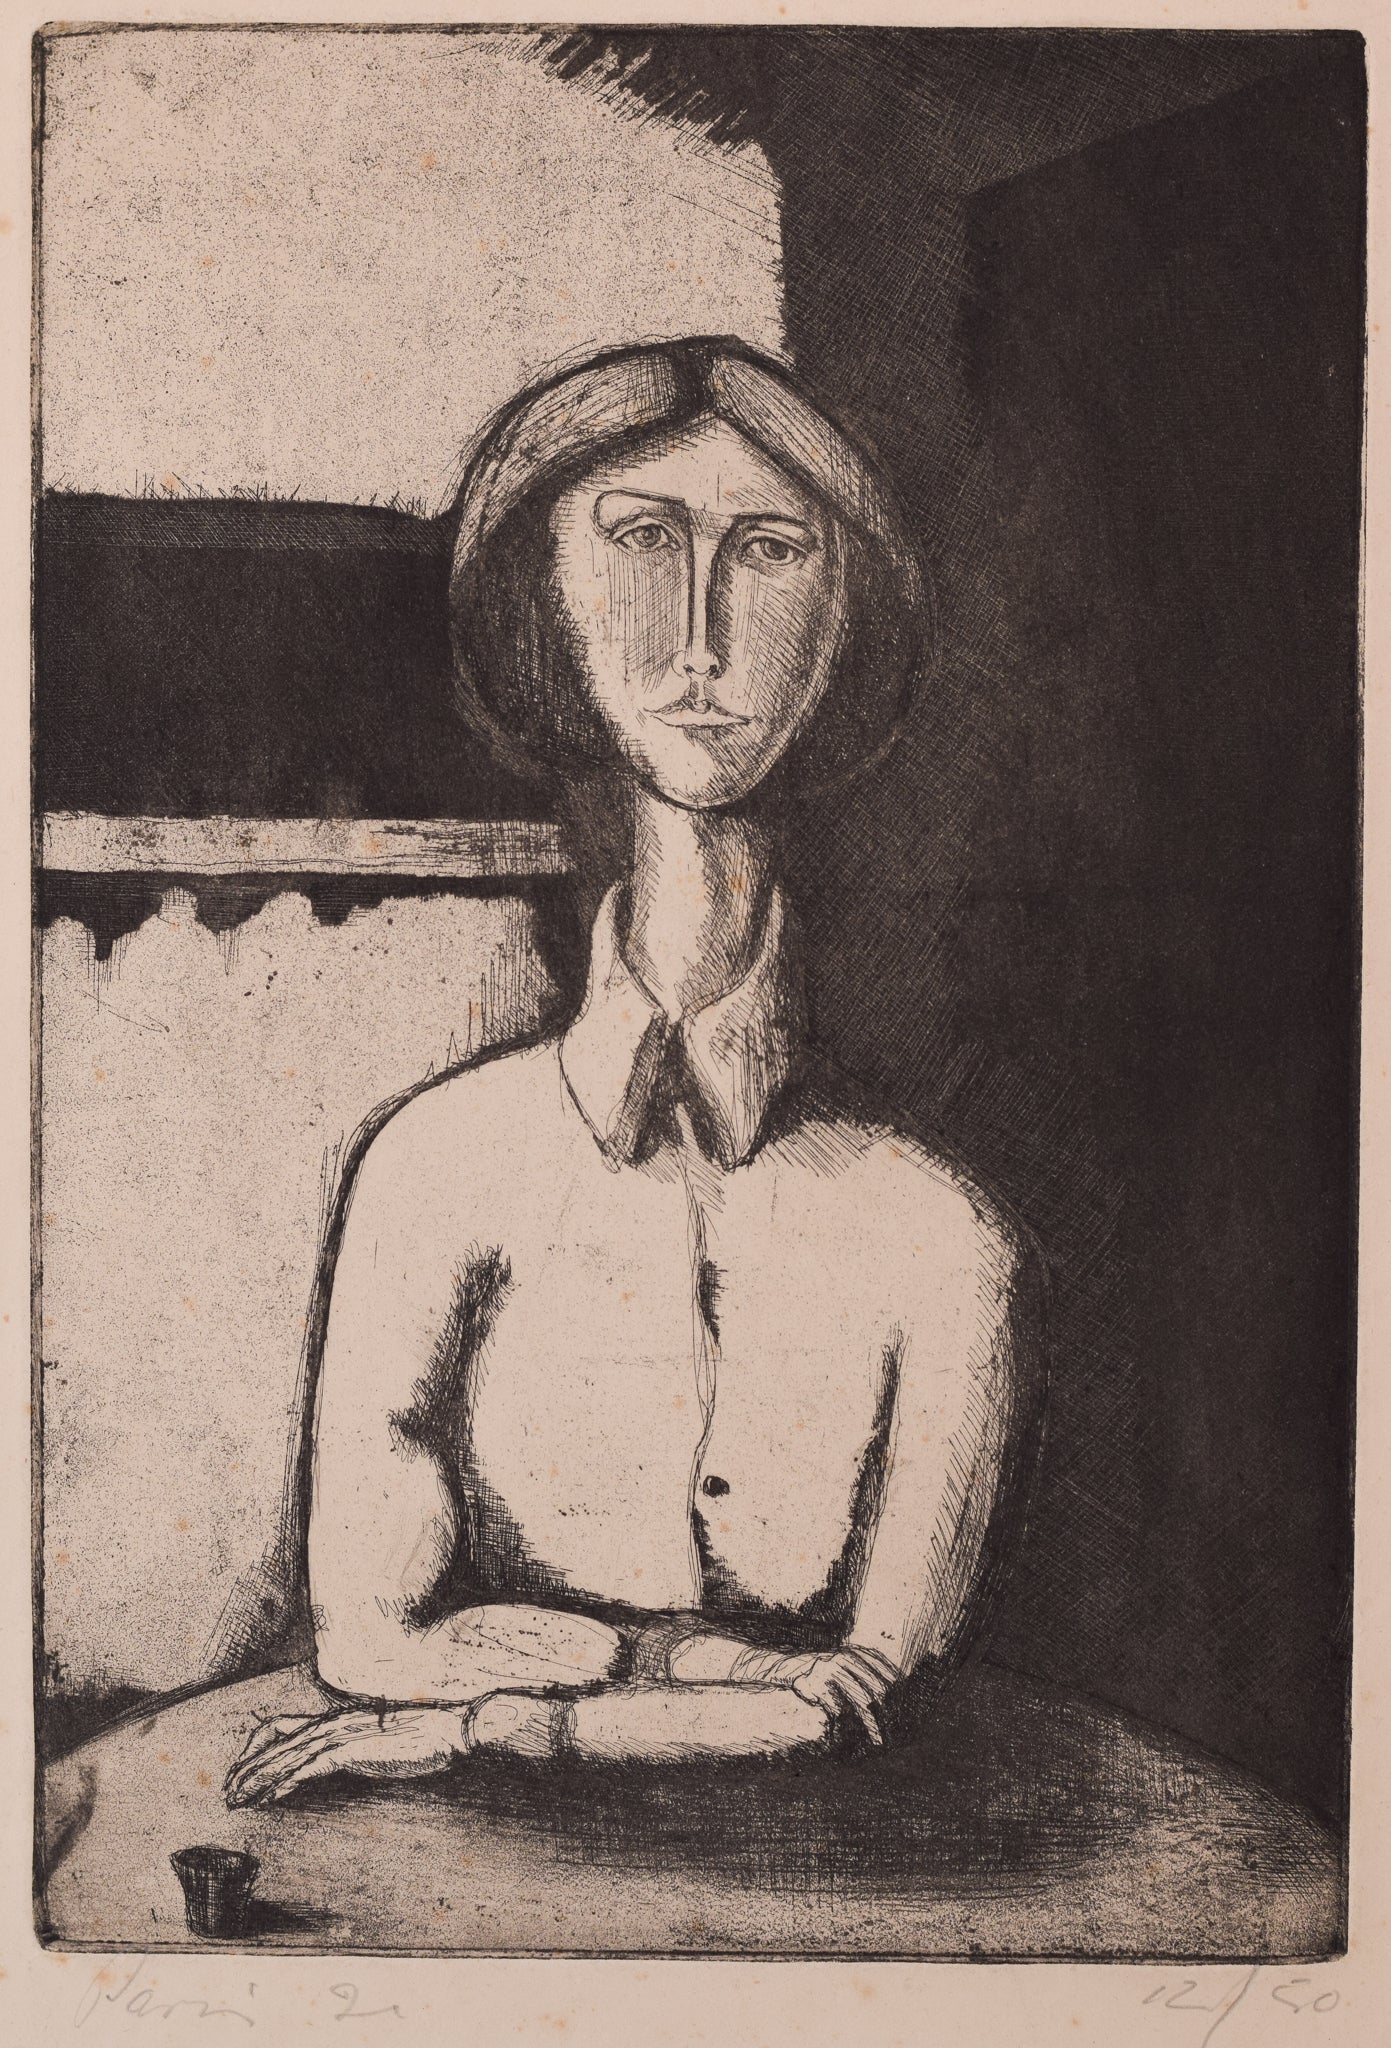 Follower of Picasso - Etching Portrait of a Lady